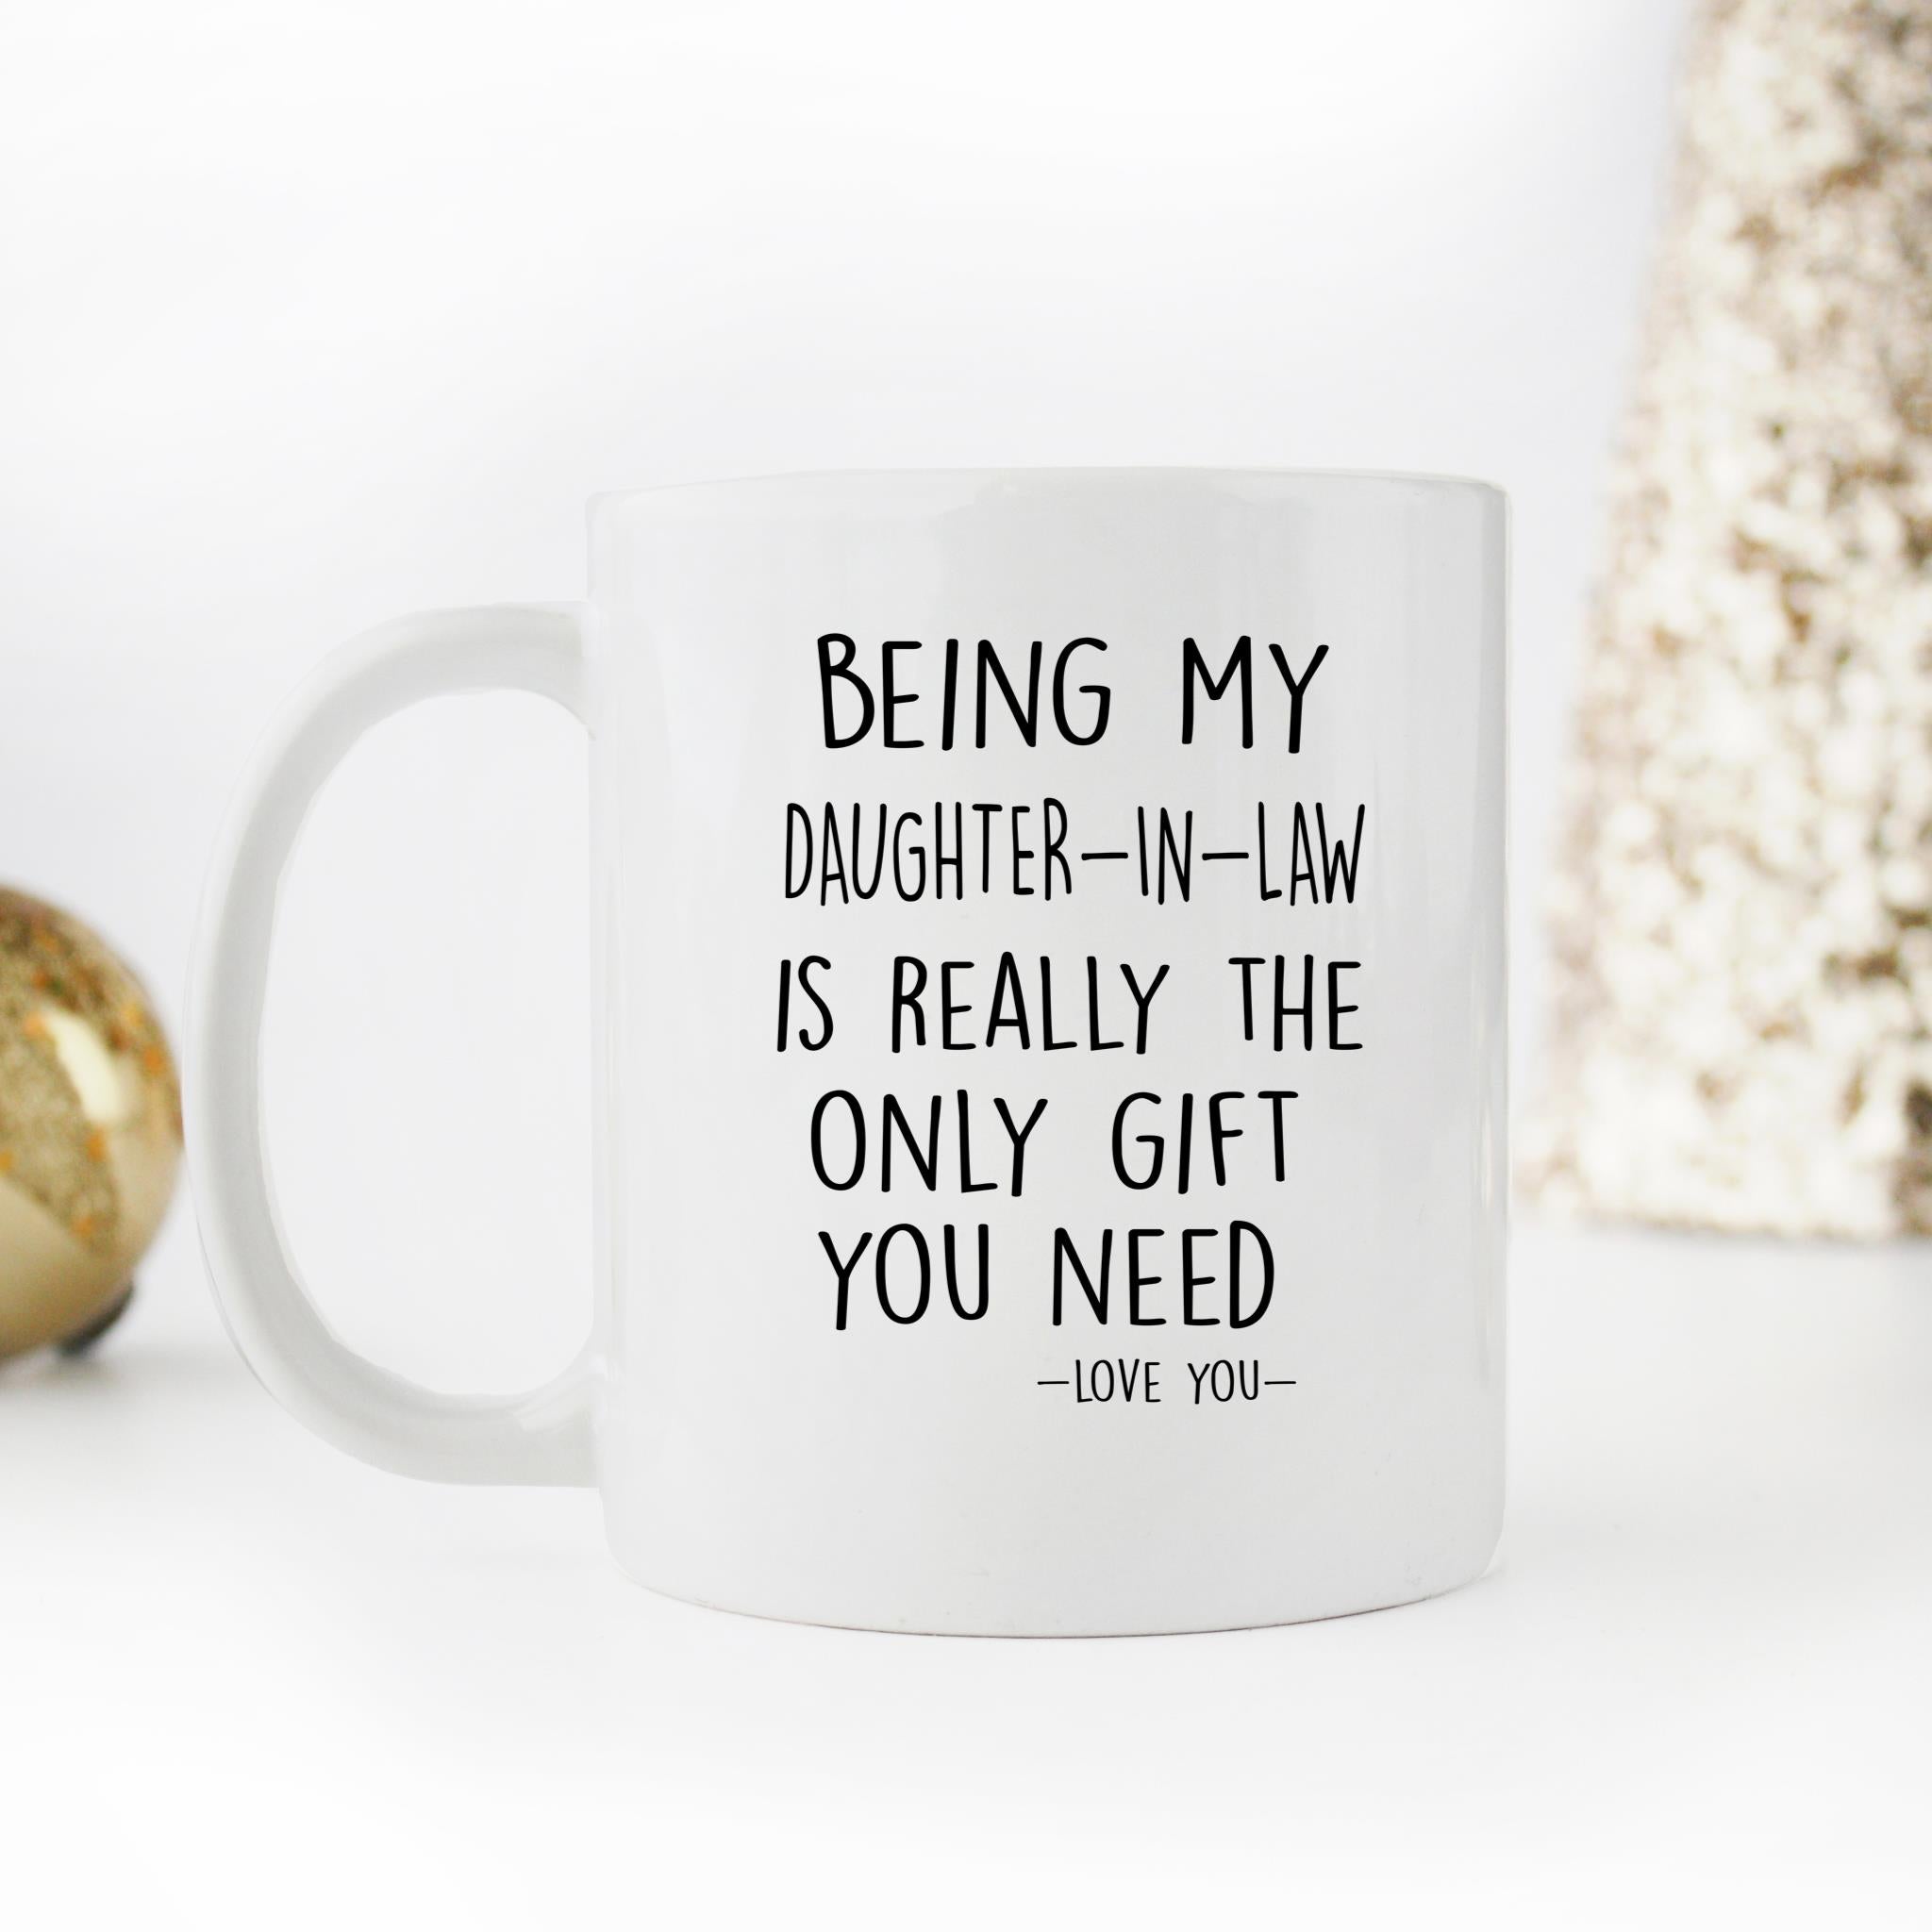 Skitongifts Funny Ceramic Novelty Coffee Mug Being My Daughter-In-Law Is Really The Only Gift You Need - Love You Daughter-In-Law Funny Gift wWuoyIA